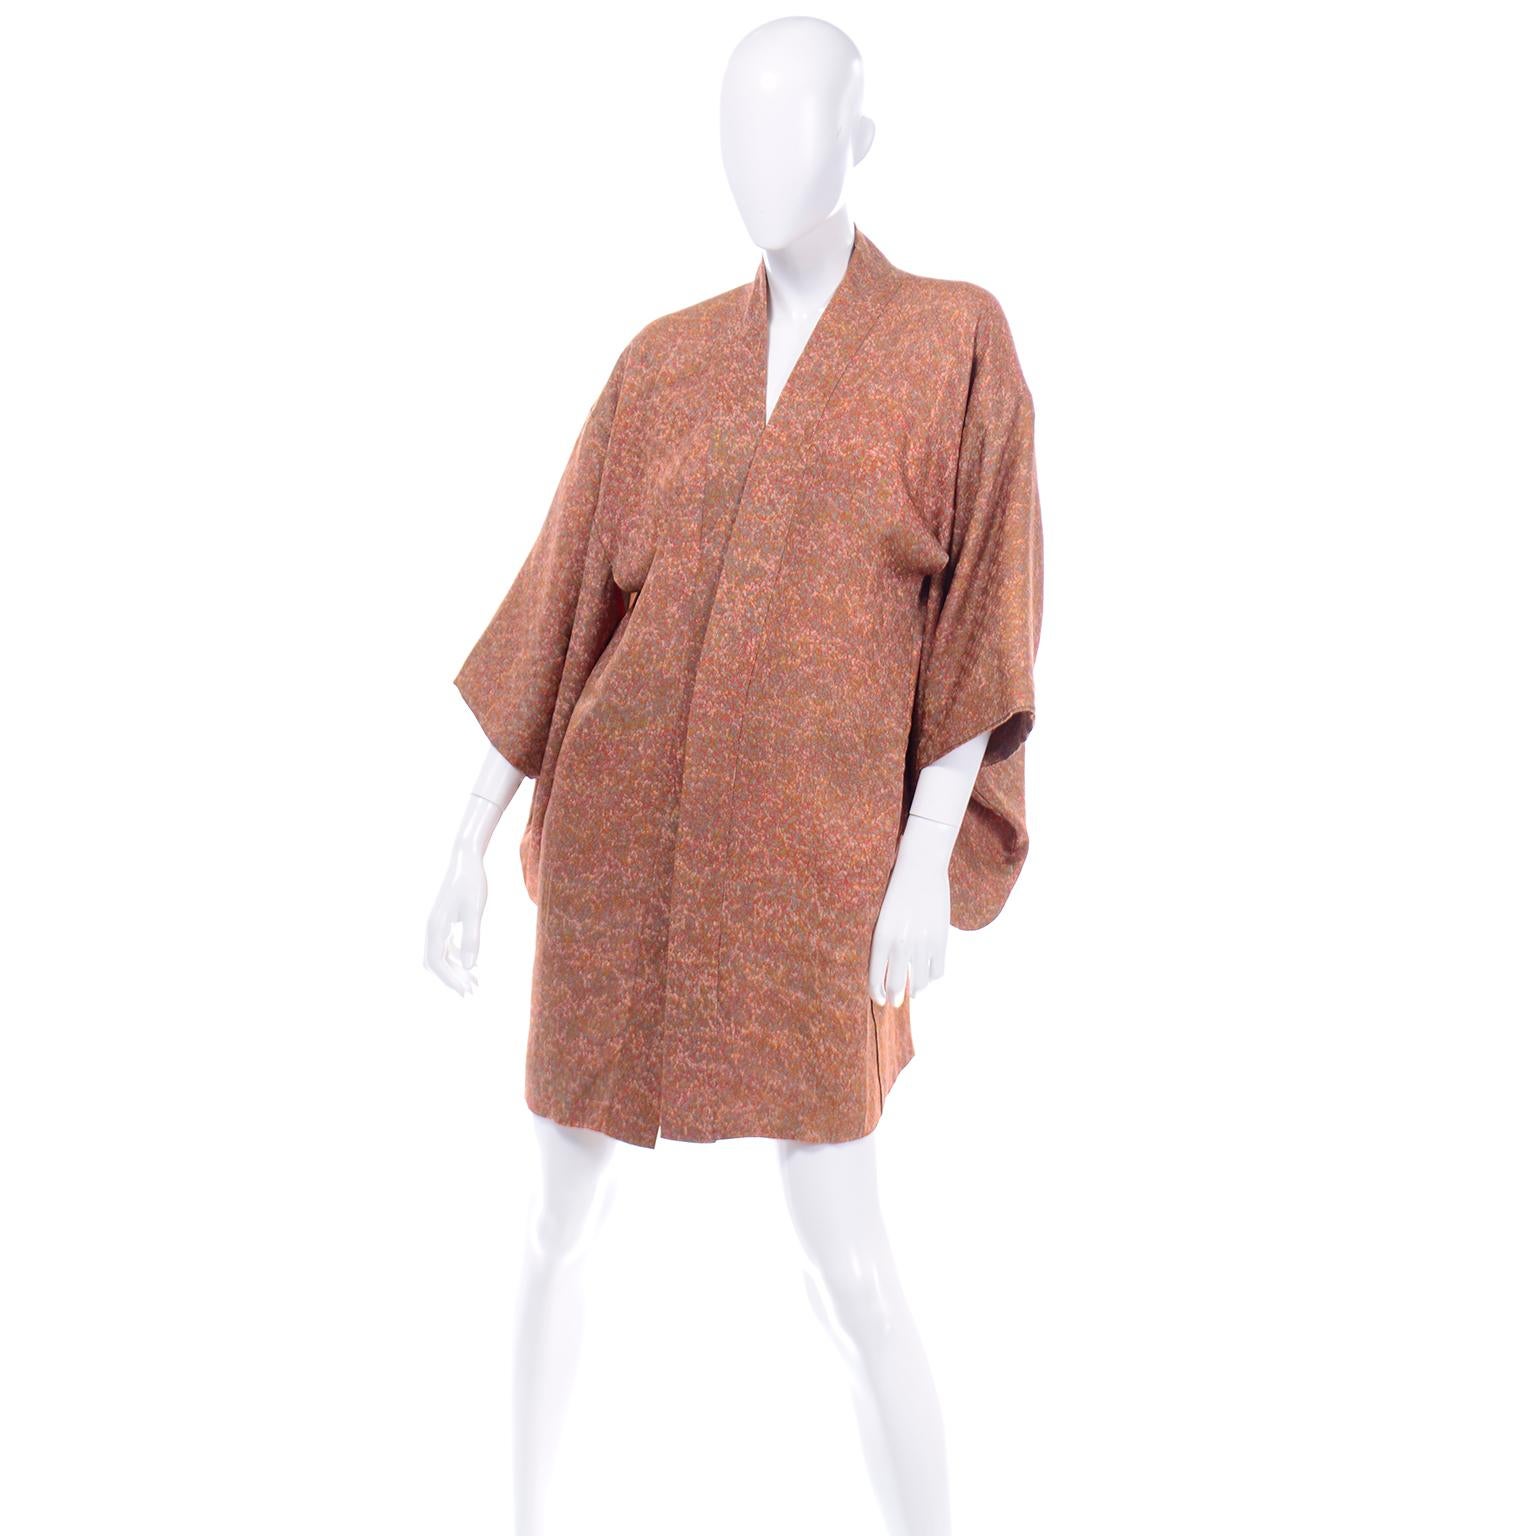 This pretty 1930's vintage Japanese silk haori kimono is in a tiny floral print in shades of orange, pink, lime, sage. The inside lining is a gorgeous Japanese printed garden scene in light pink, pale yellow, and orange. This is a shorter kimono